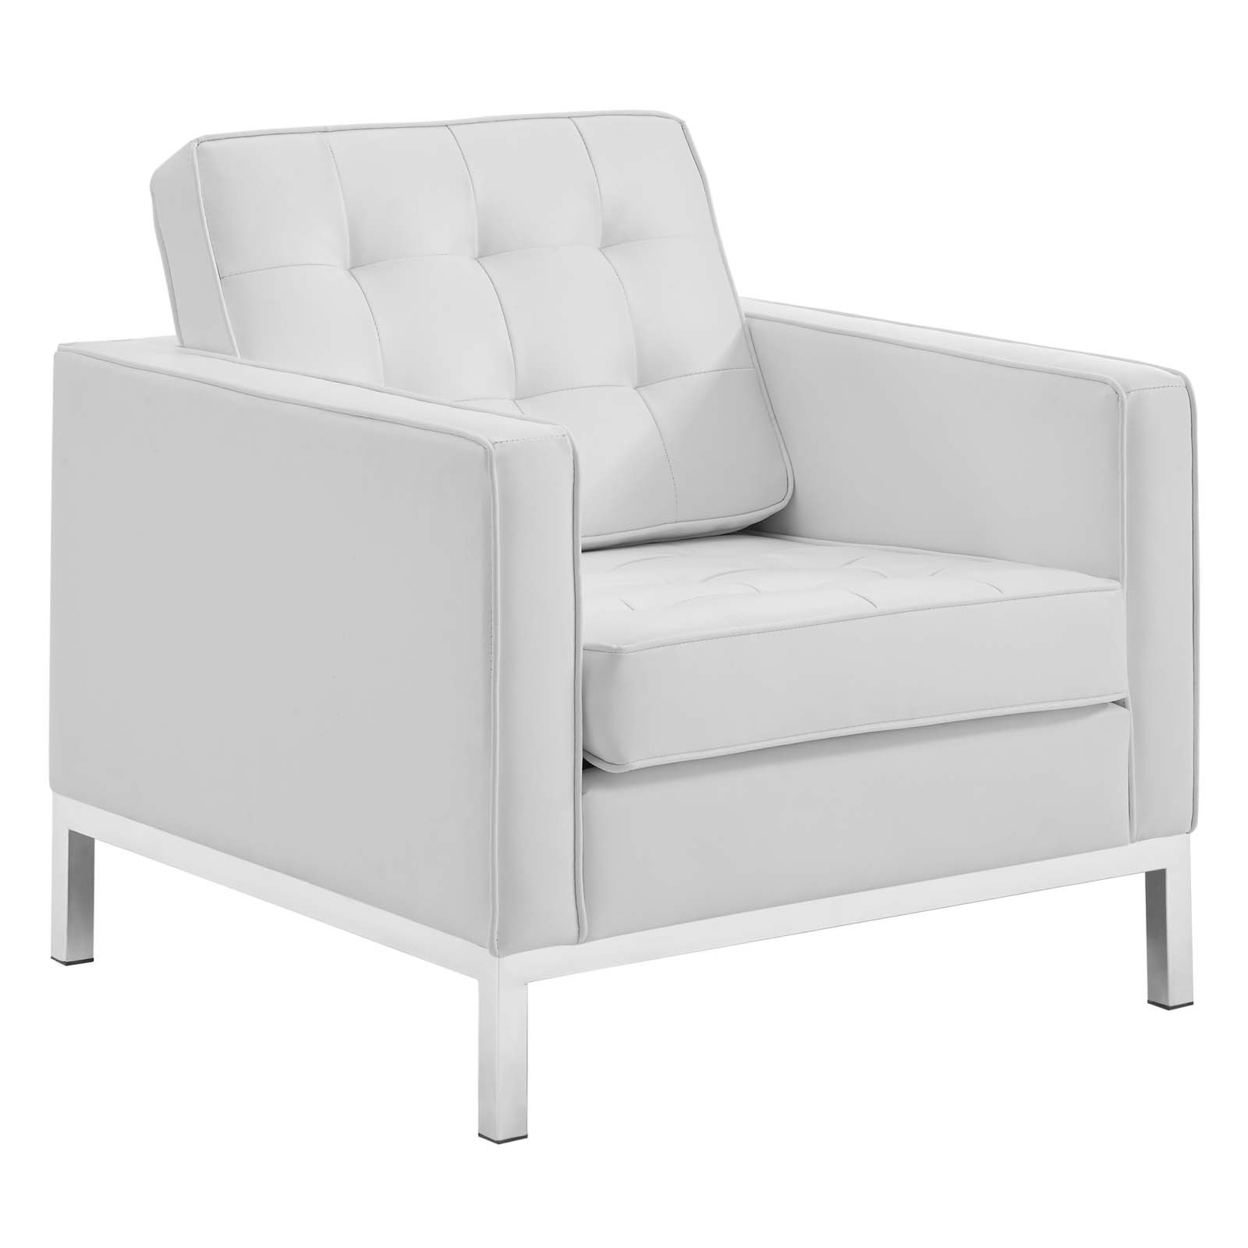 Loft Tufted Upholstered Faux Leather Armchair,Silver White